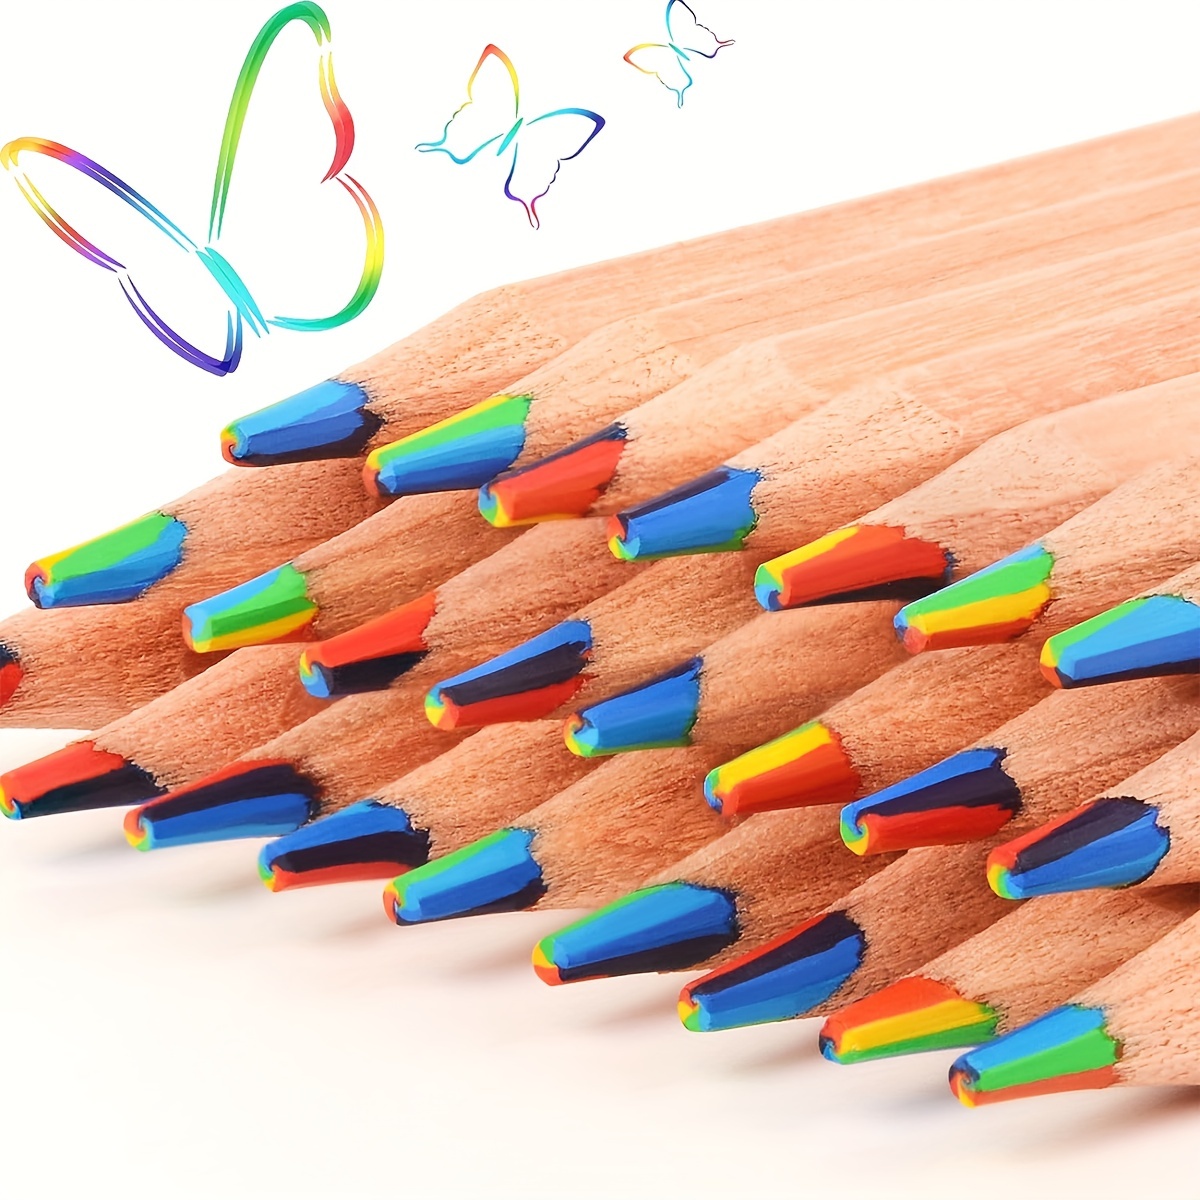 

10pcs Wooden Colored Pencils, 7 Colors In 1 Core, Color Drawing Pencils. Suitable For Adult Andstudent Creation, Home Painting, Christmas Card Coloring, Handmade Diy Drawing Sketches